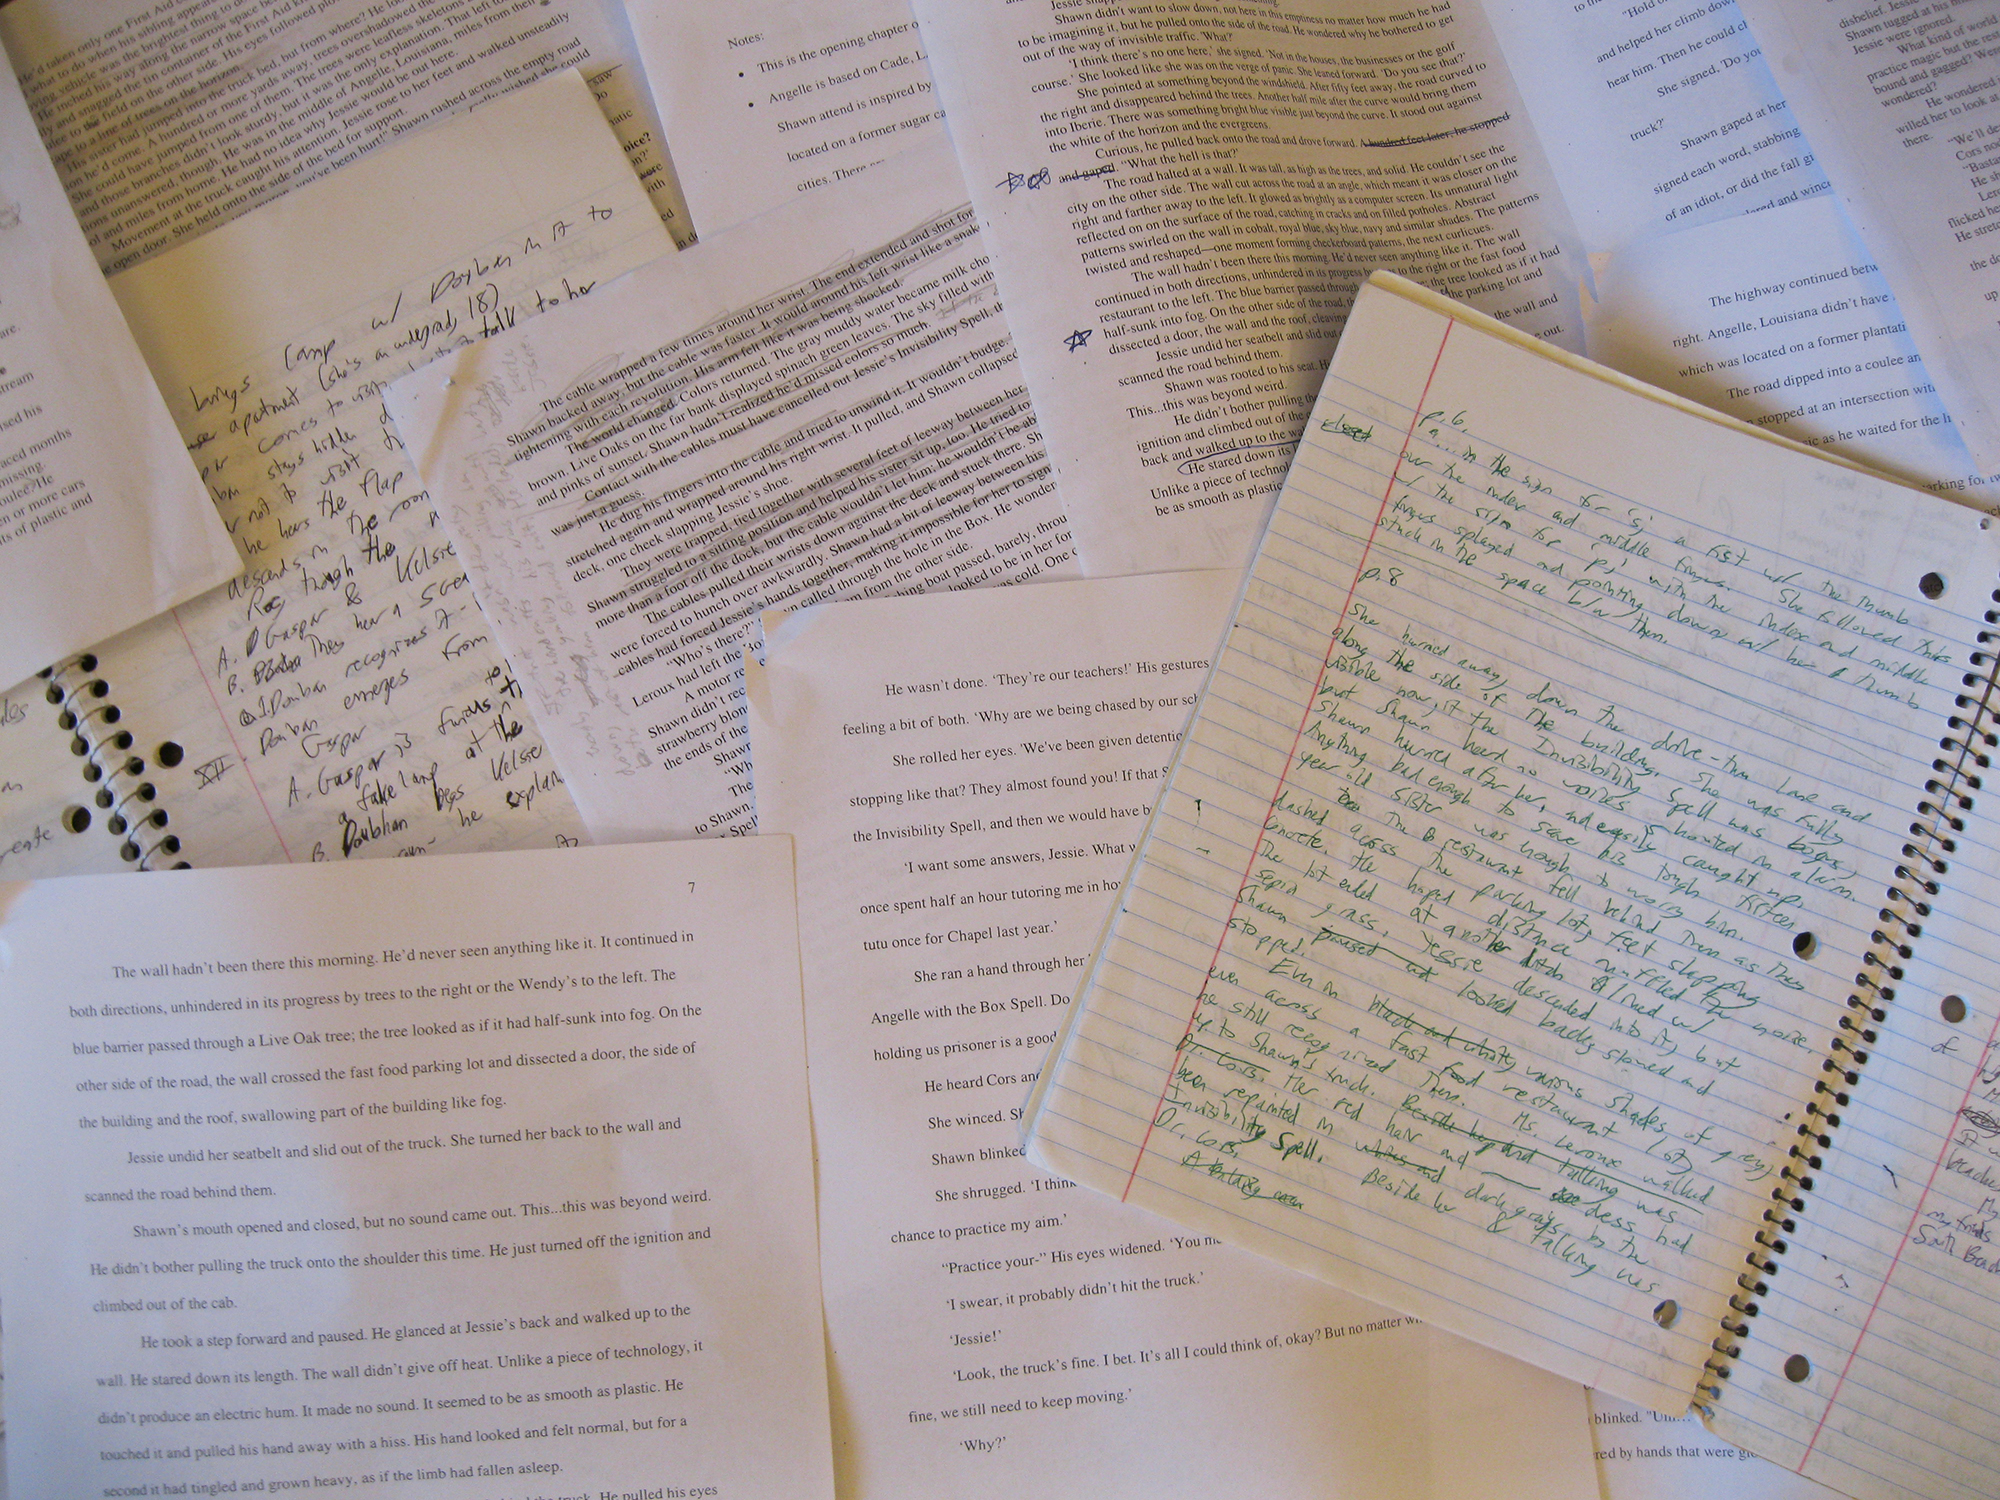 Printed and handwritten pages of written material